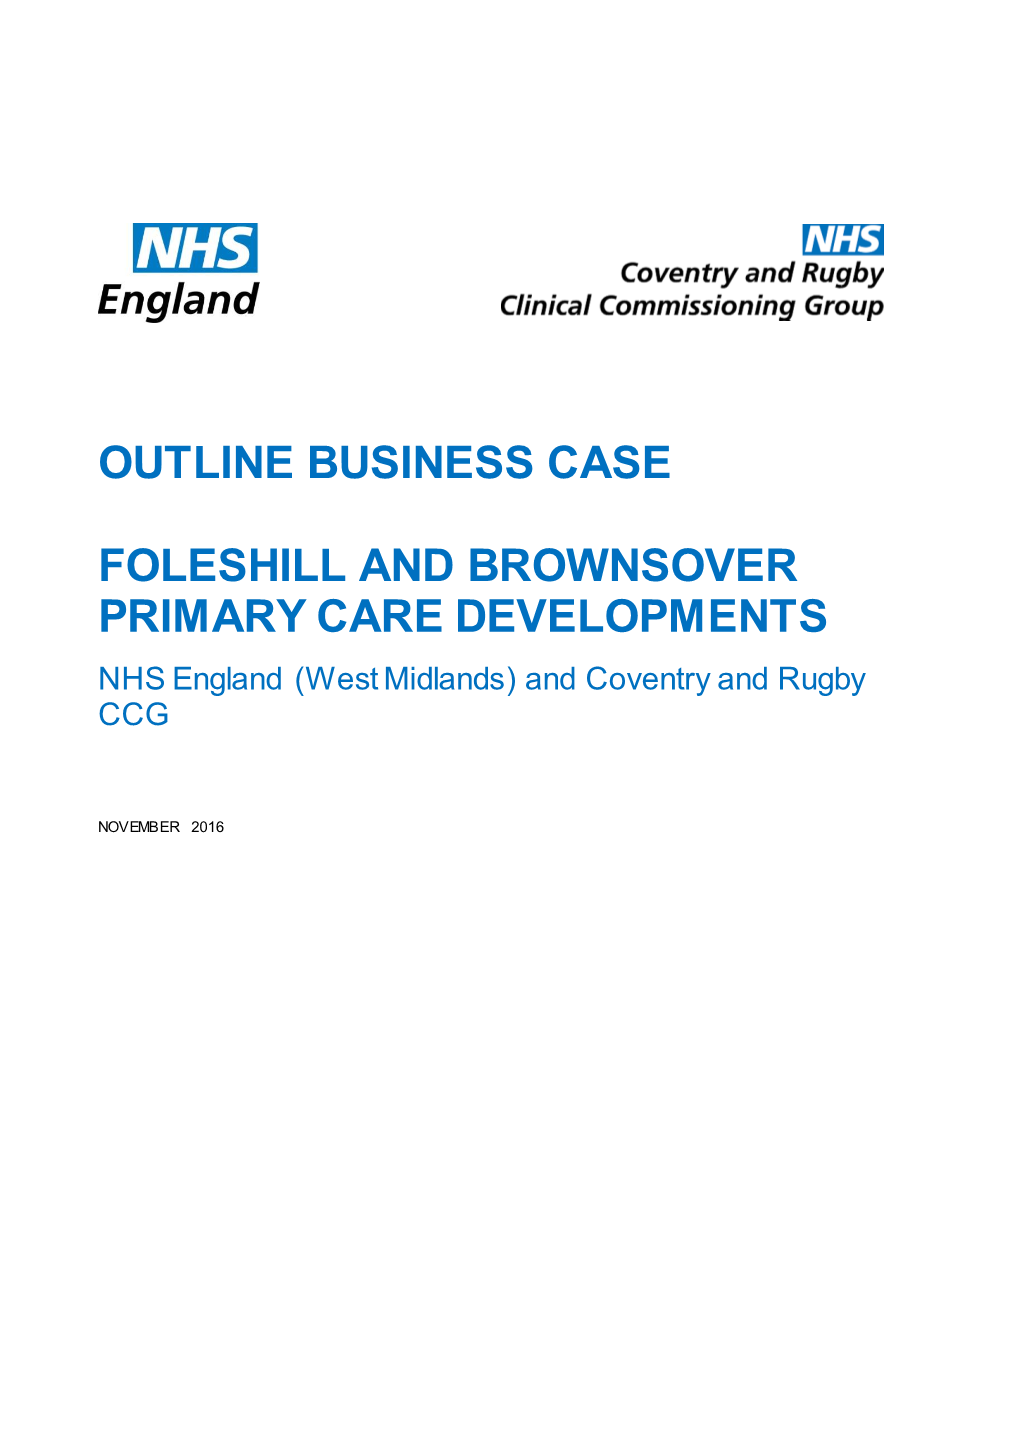 Outline Business Case Foleshill and Brownsover Primary Care Developments